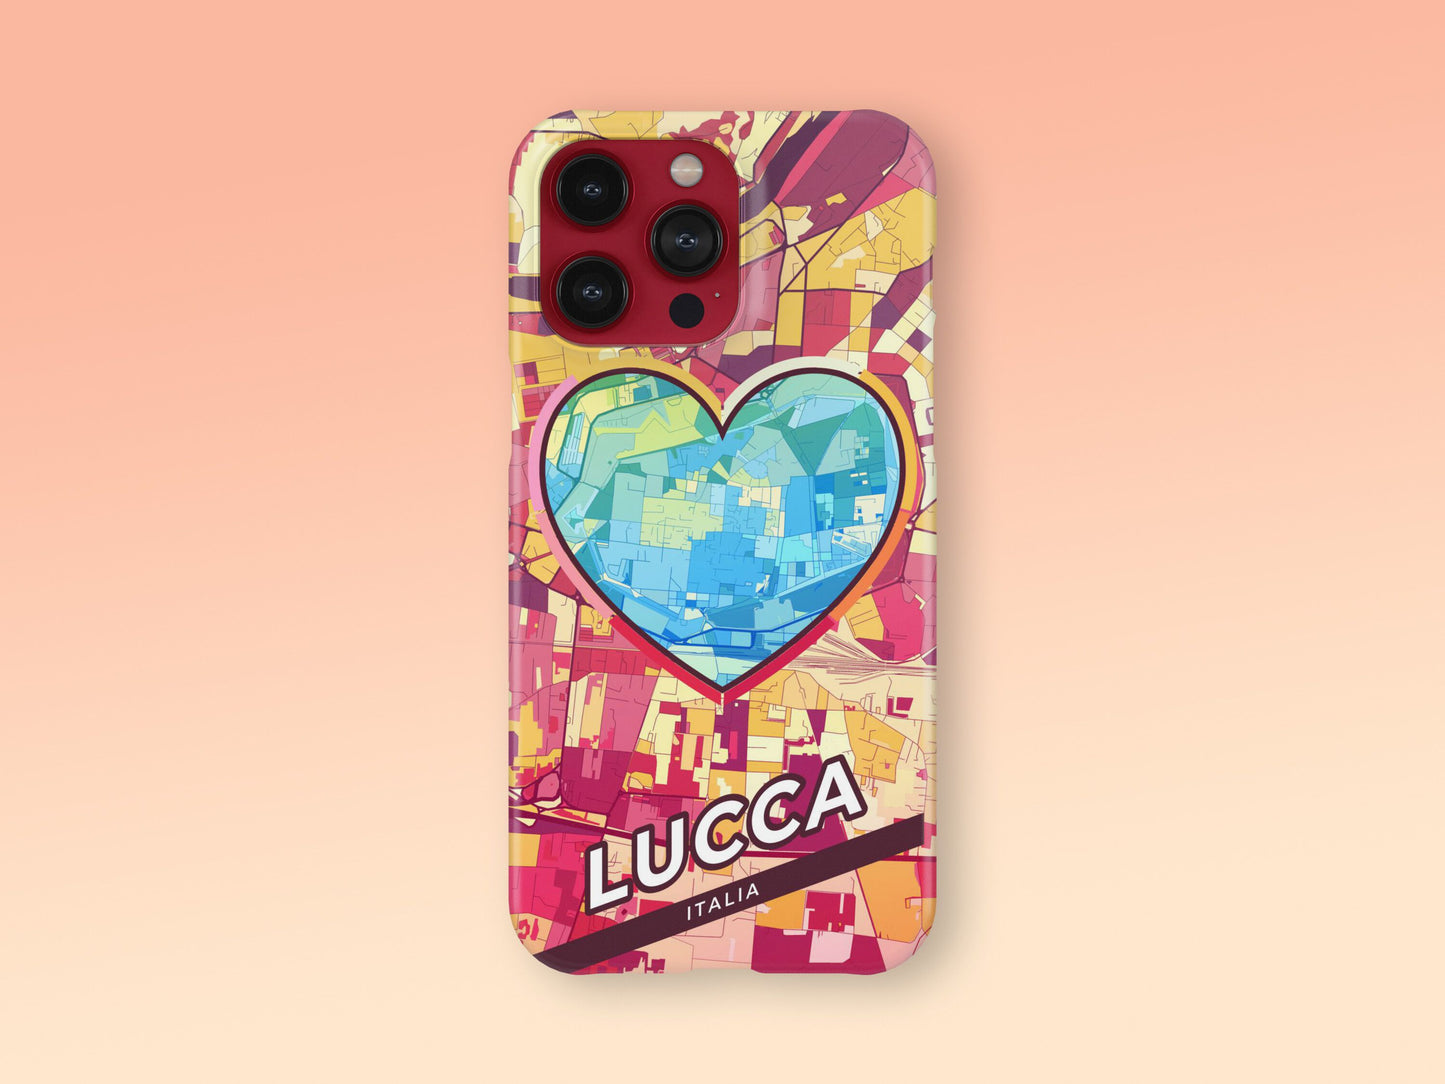 Lucca Italy slim phone case with colorful icon. Birthday, wedding or housewarming gift. Couple match cases. 2